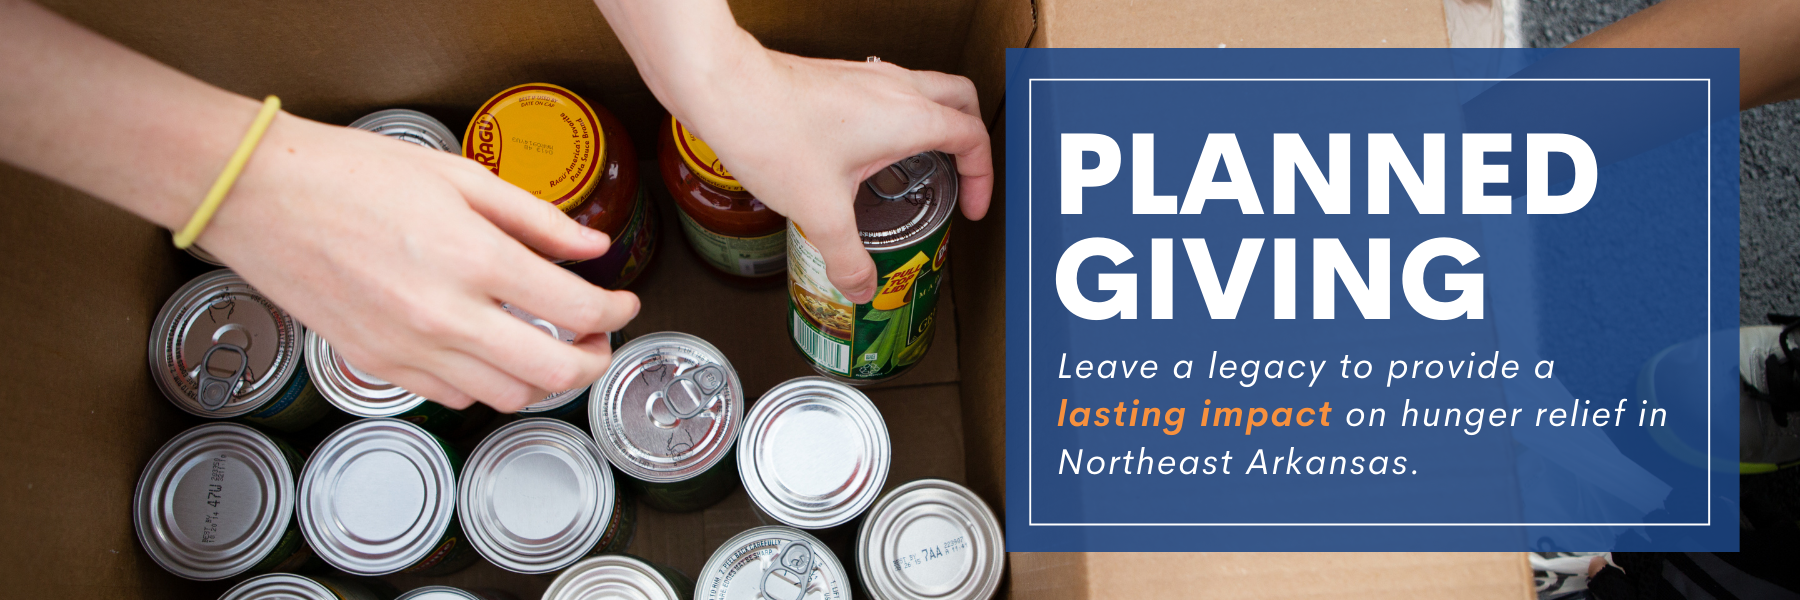 Planned giving. Leave a legacy to provide a lasting impact on hunger relief in Northeast Arkansas. 